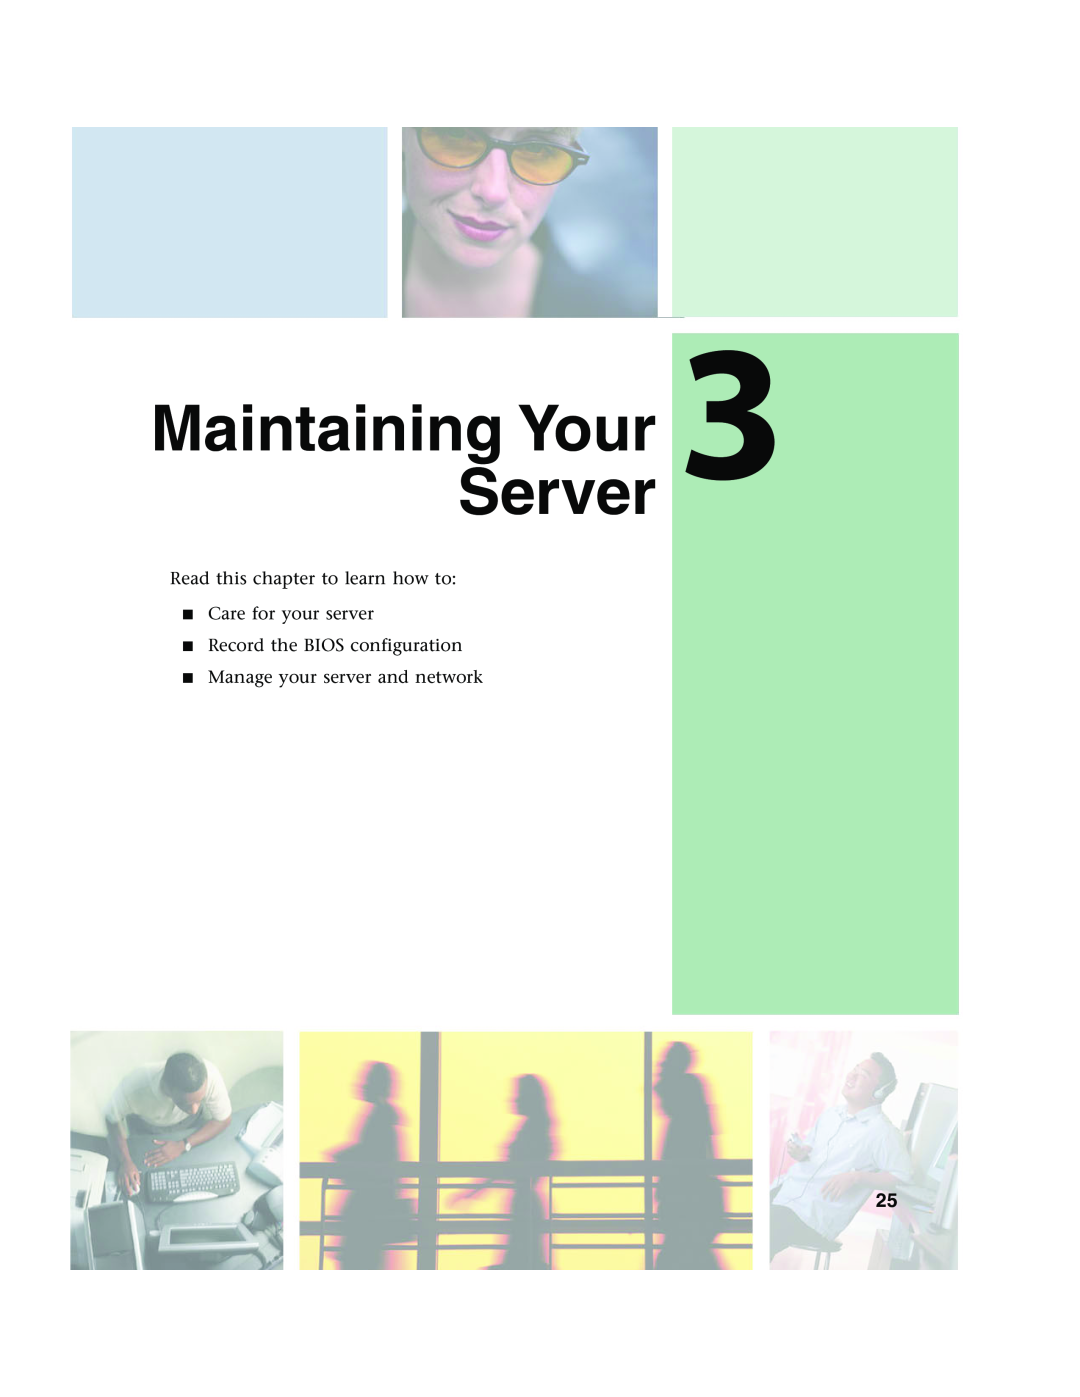 Gateway 955 manual MaintainingServerYour, Read this chapter to learn how to Care for your server 